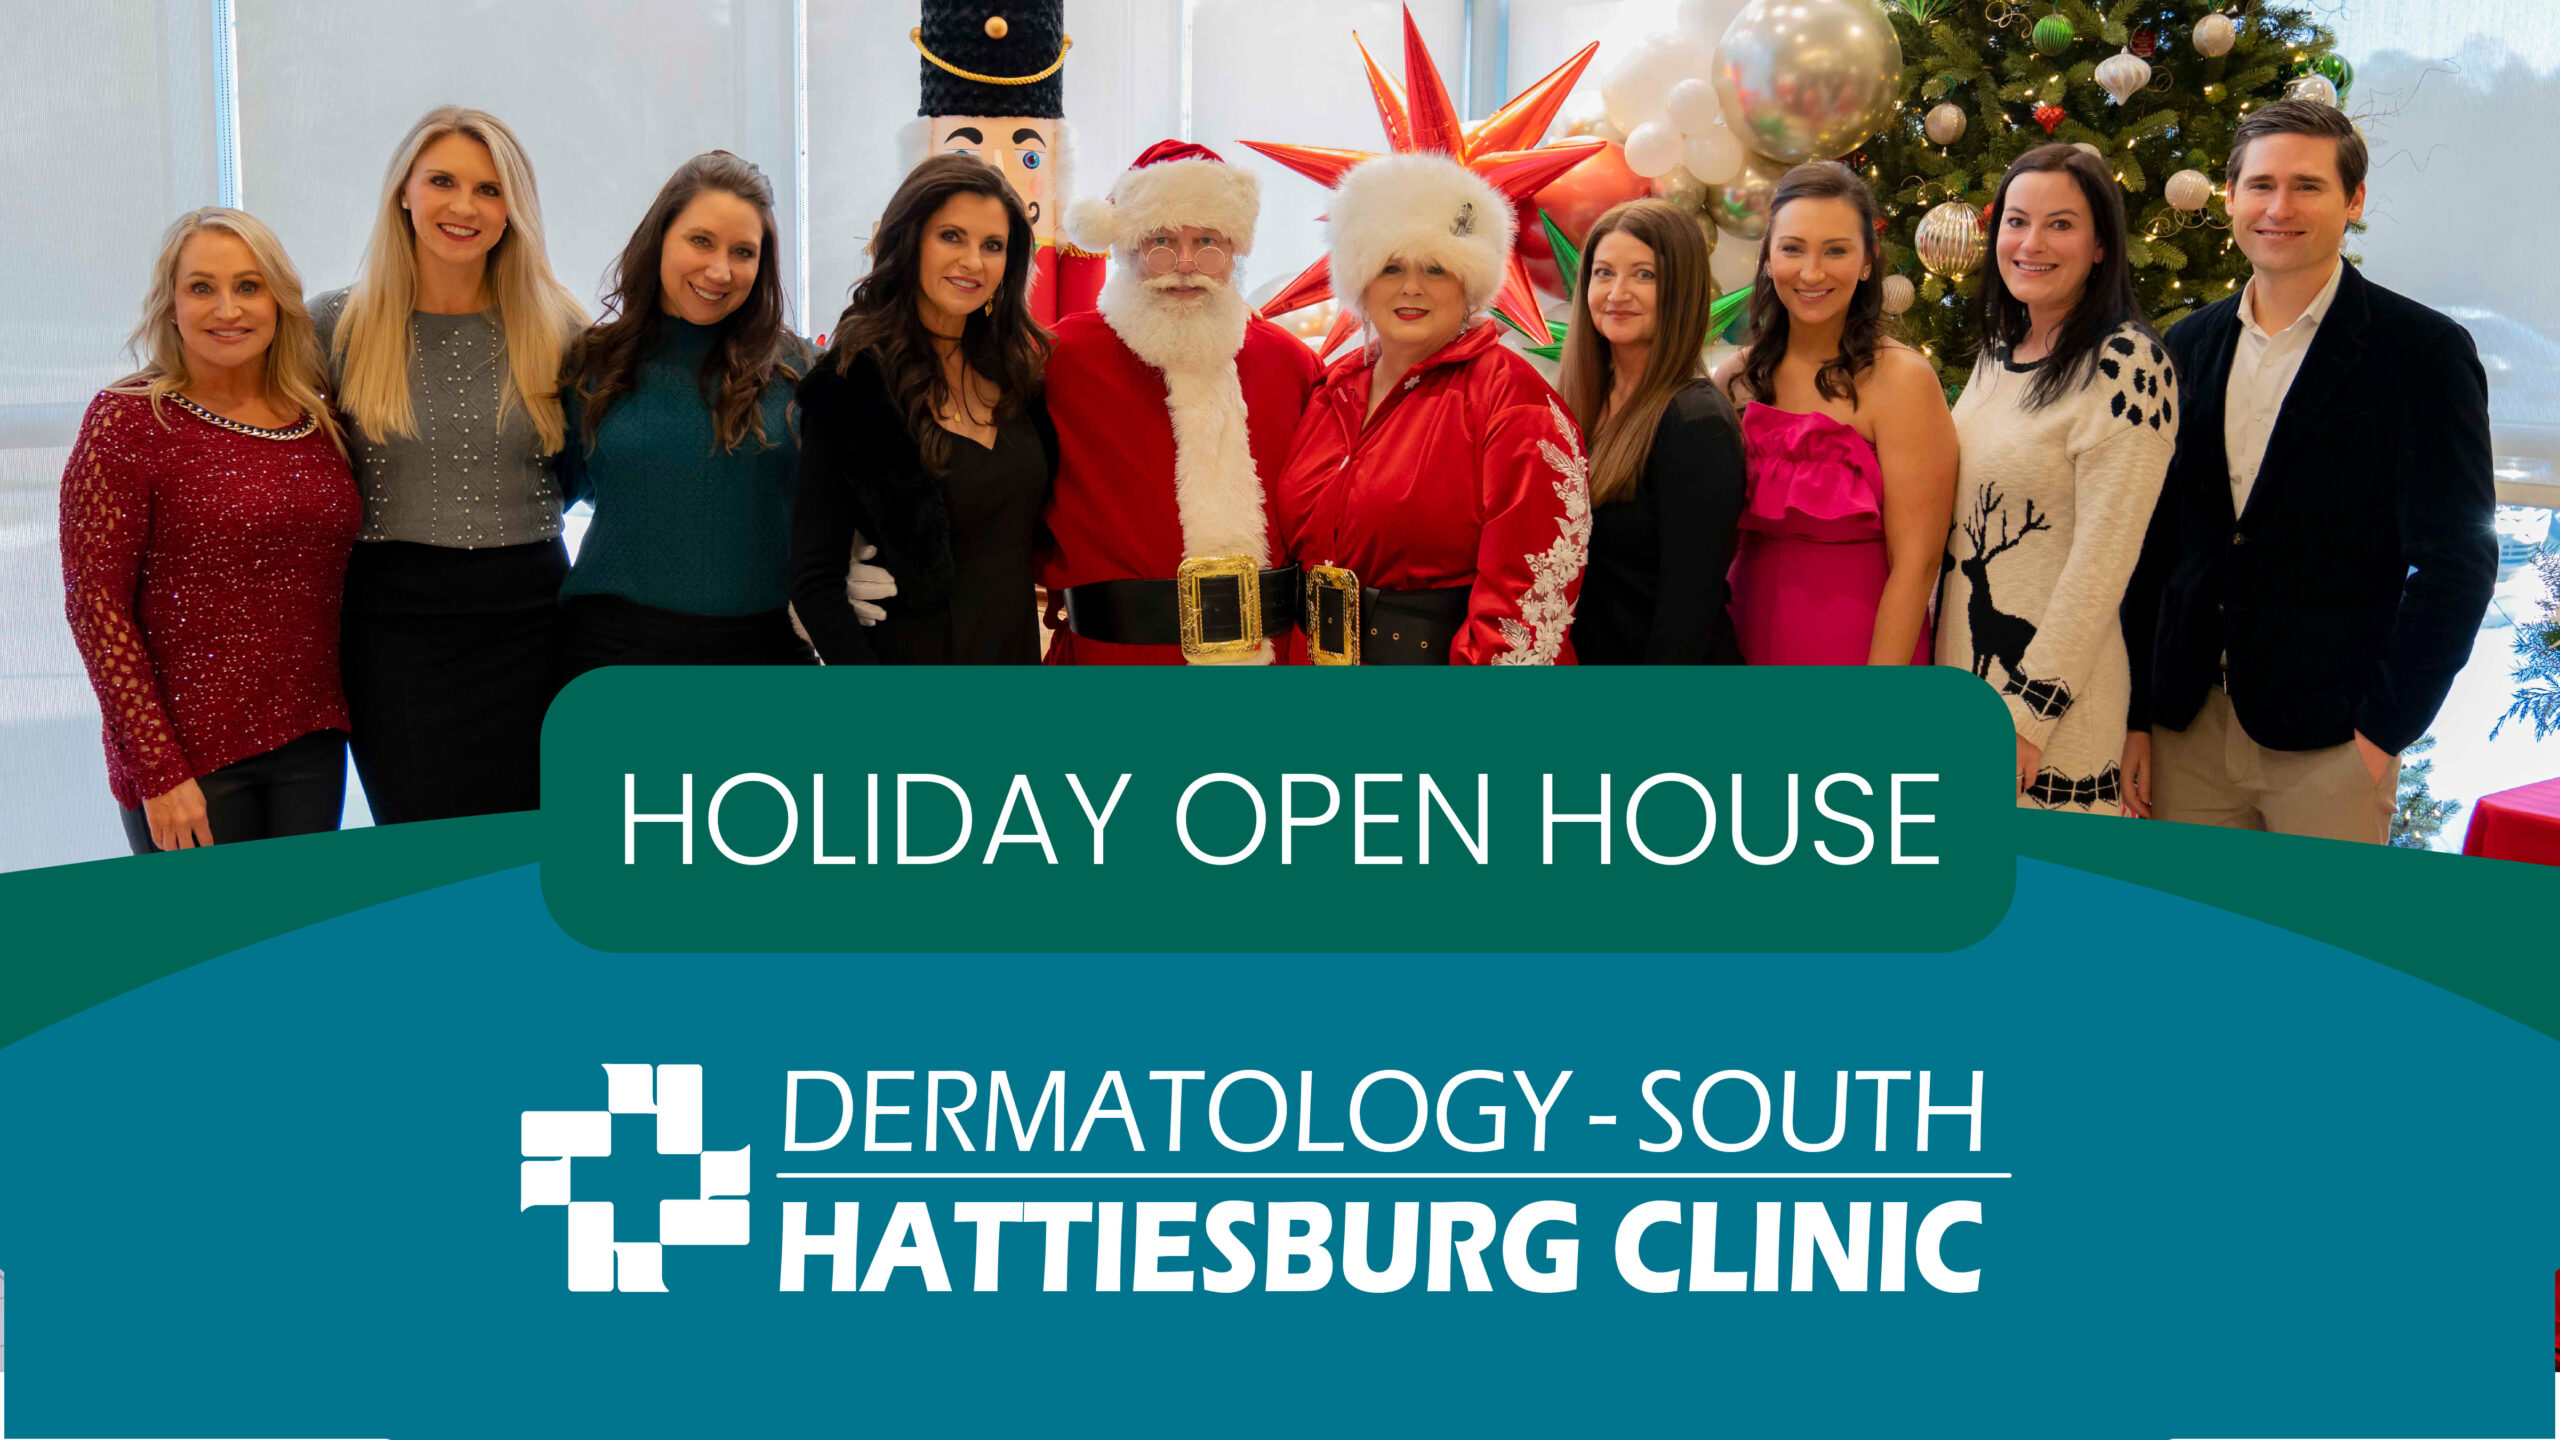 Dermatology – South Holiday Open House